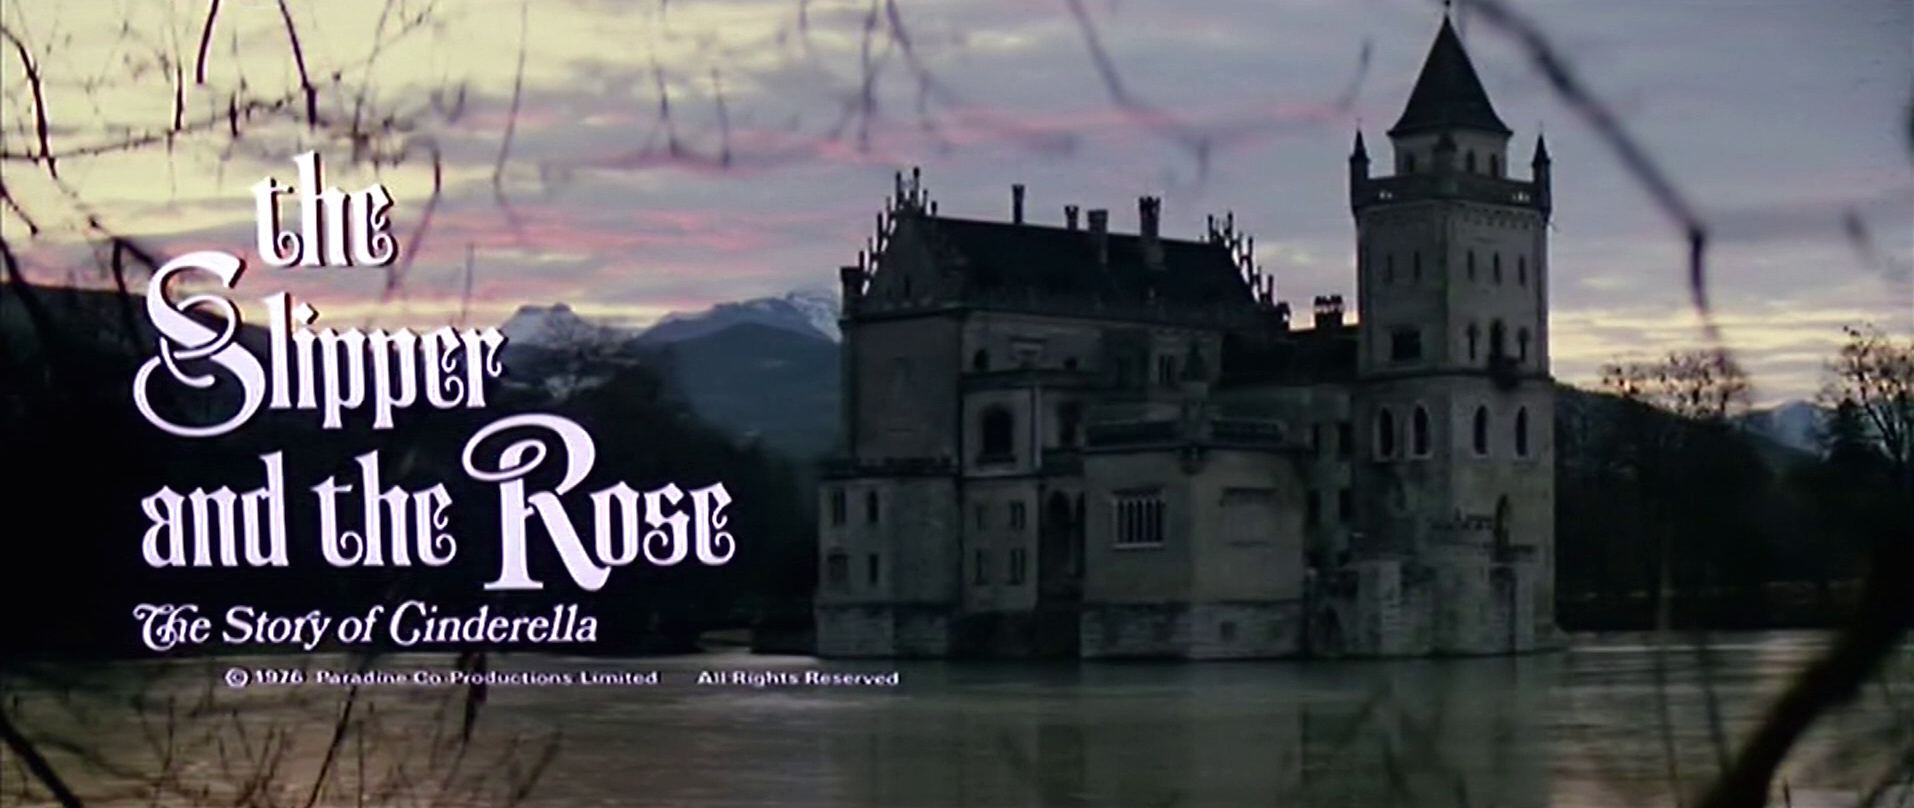 Main title from The Slipper and the Rose (1976) (3)